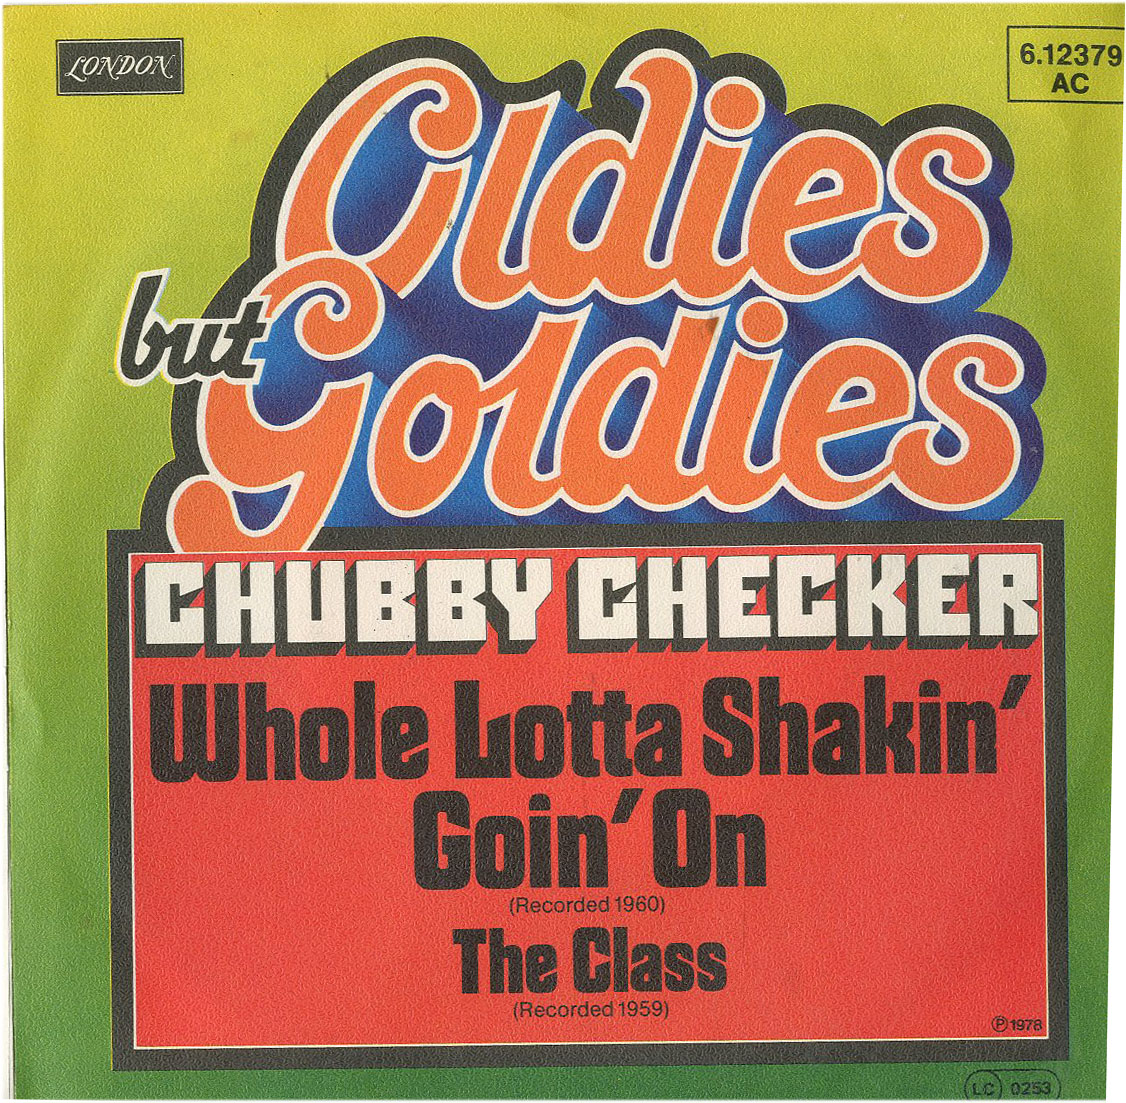 Albumcover Chubby Checker - Whole Lotta Shakin Goin On  (1960) / The Claass (1959) Oldies but Goldies